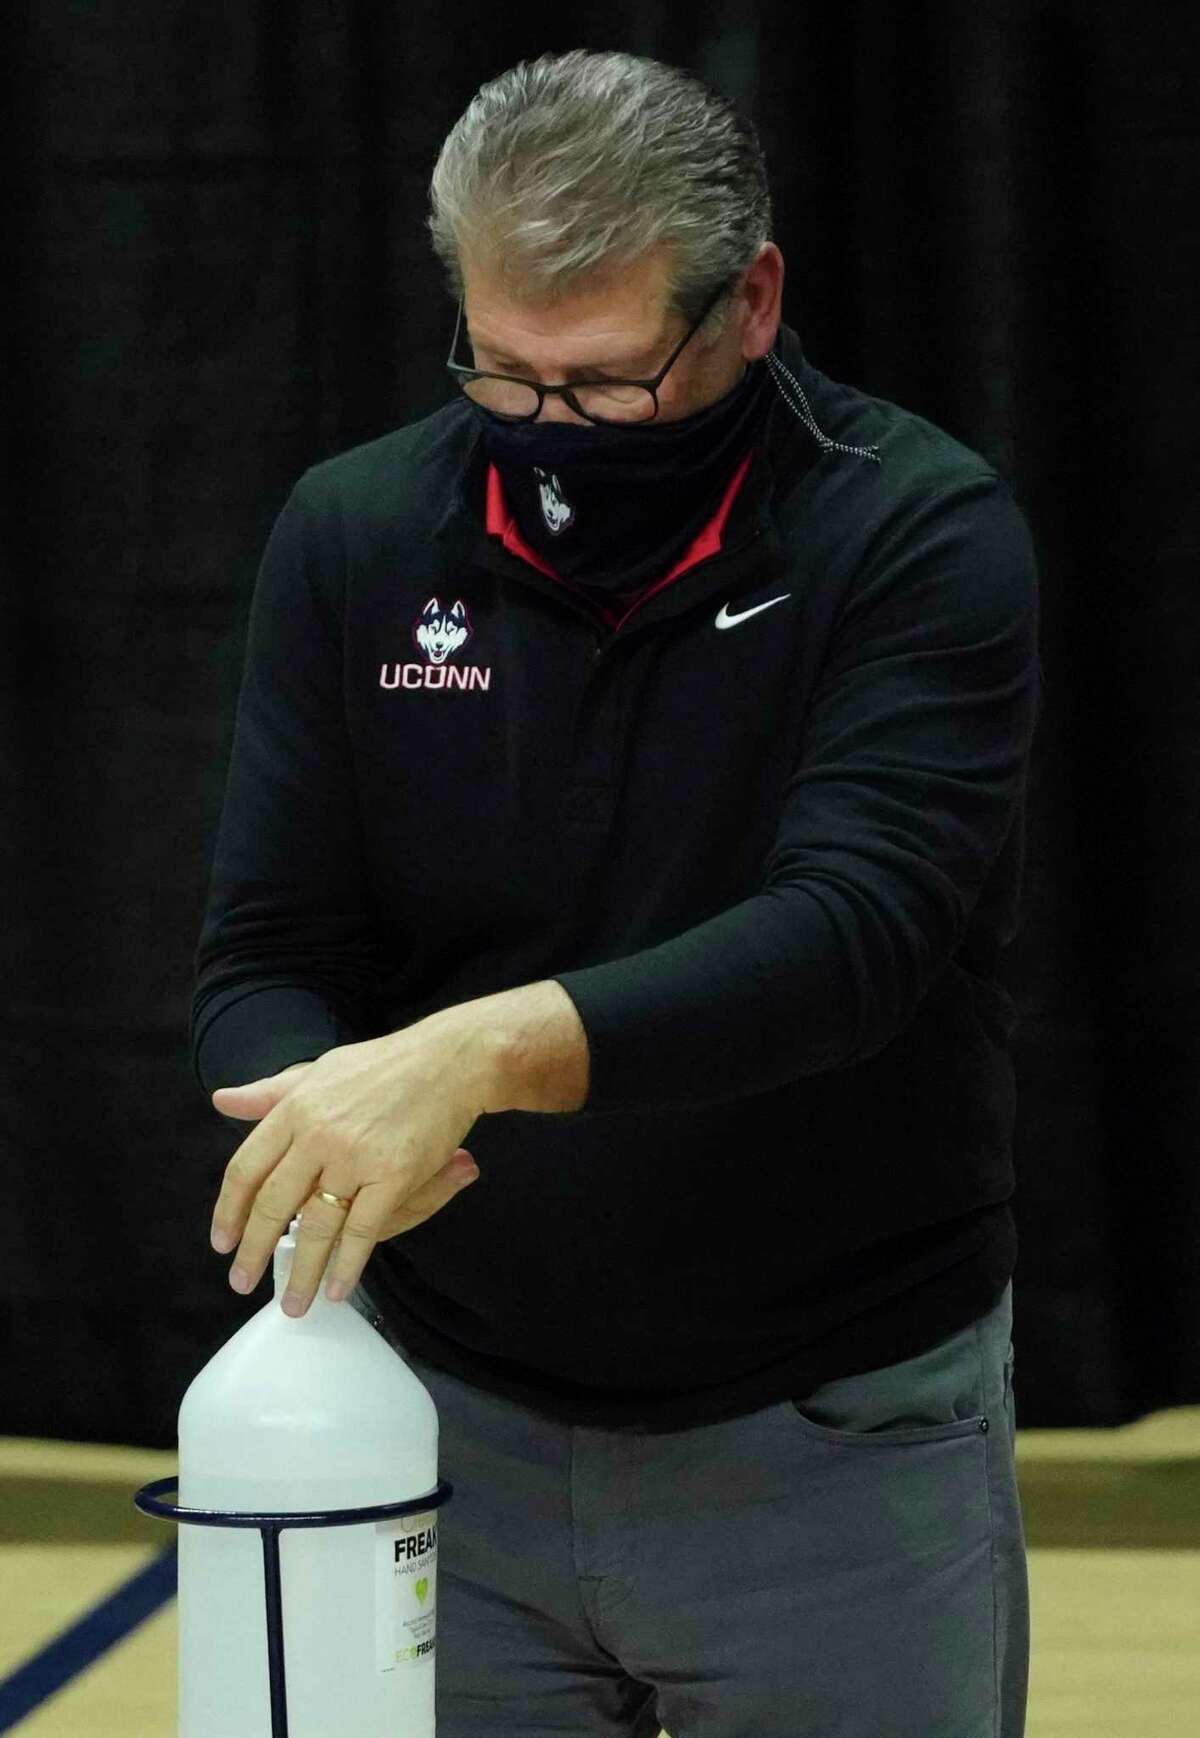 UConn women’s basketball coach Geno Auriemma uses hand sanitizer as his team takes on Providence in January. Auriemma has tested positive for COVID-19 despite receiving two doses of the coronavirus vaccination.